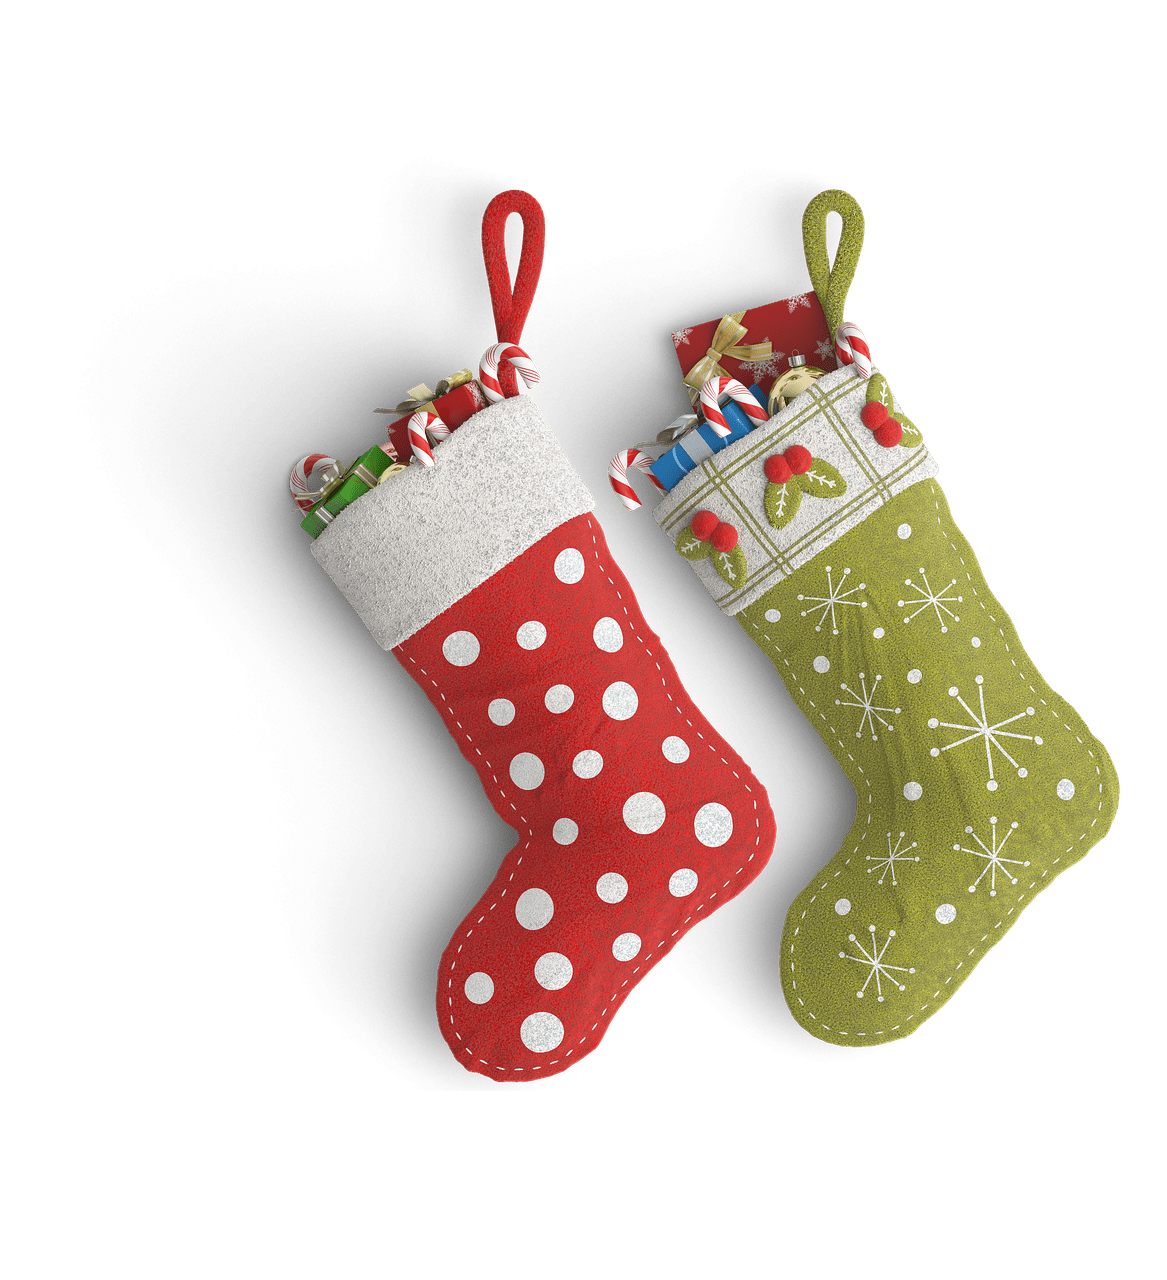 Last Minute Stocking Stuffer Ideas for the Kiddos